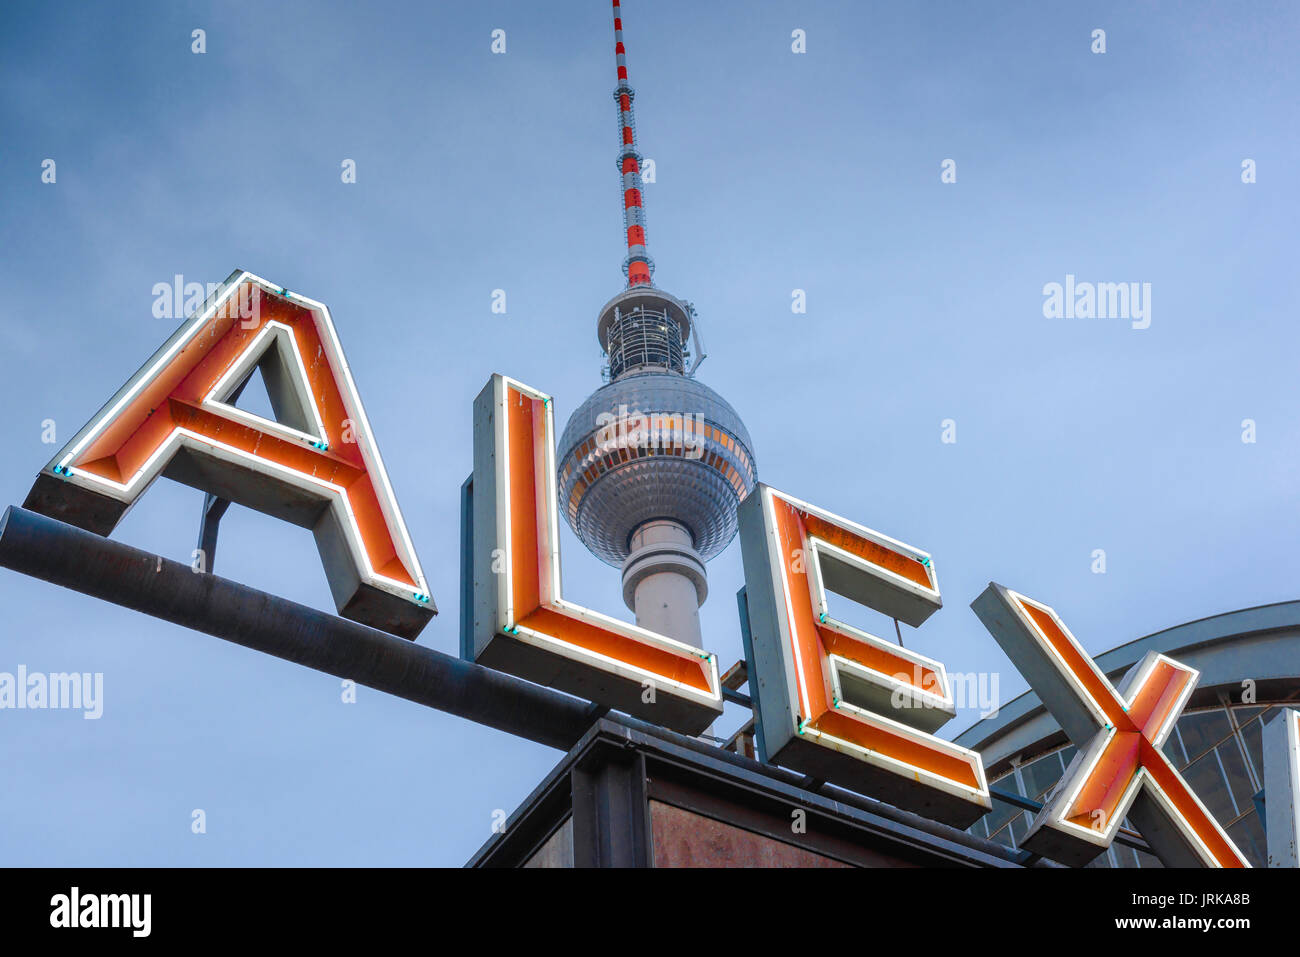 Berlin Alexanderplatz, view of detail of the famous red neon sign at Alexanderplatz train station, Berlin, Germany. Stock Photo